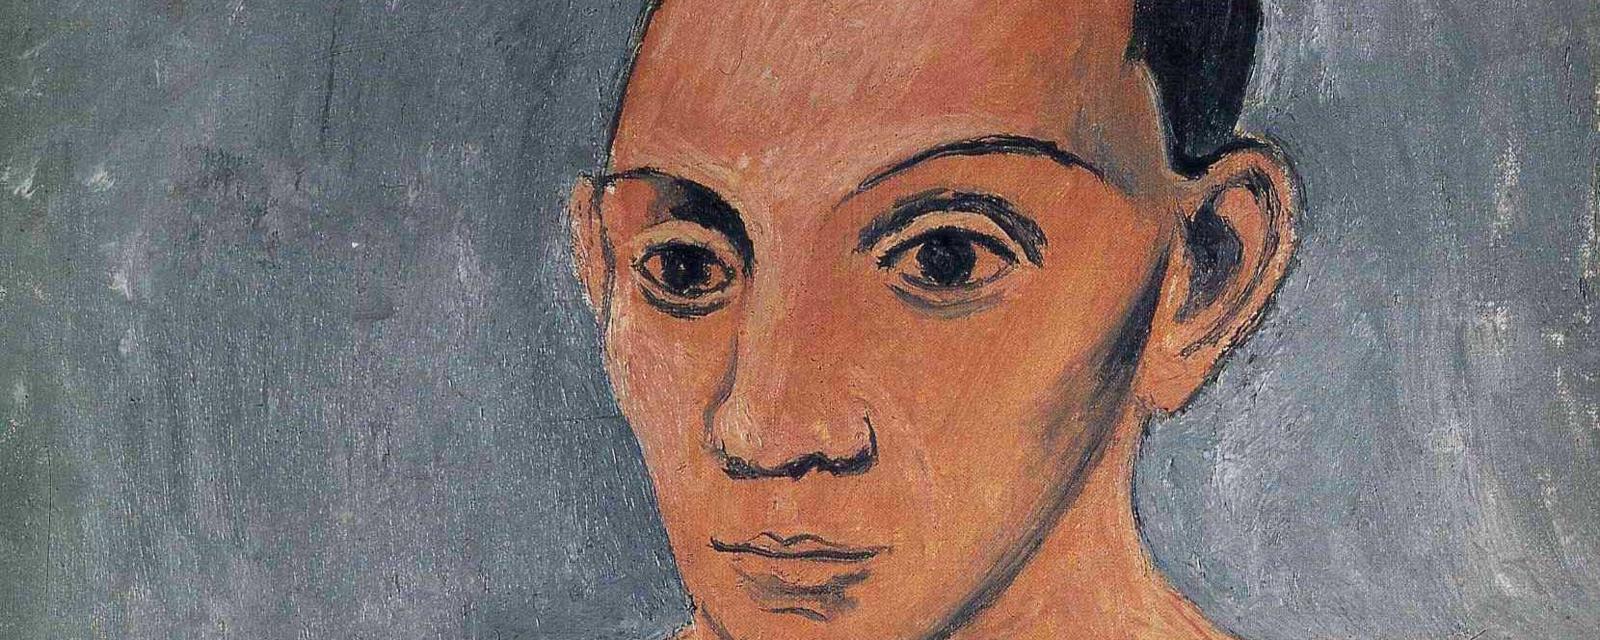 The moment that changed Picasso